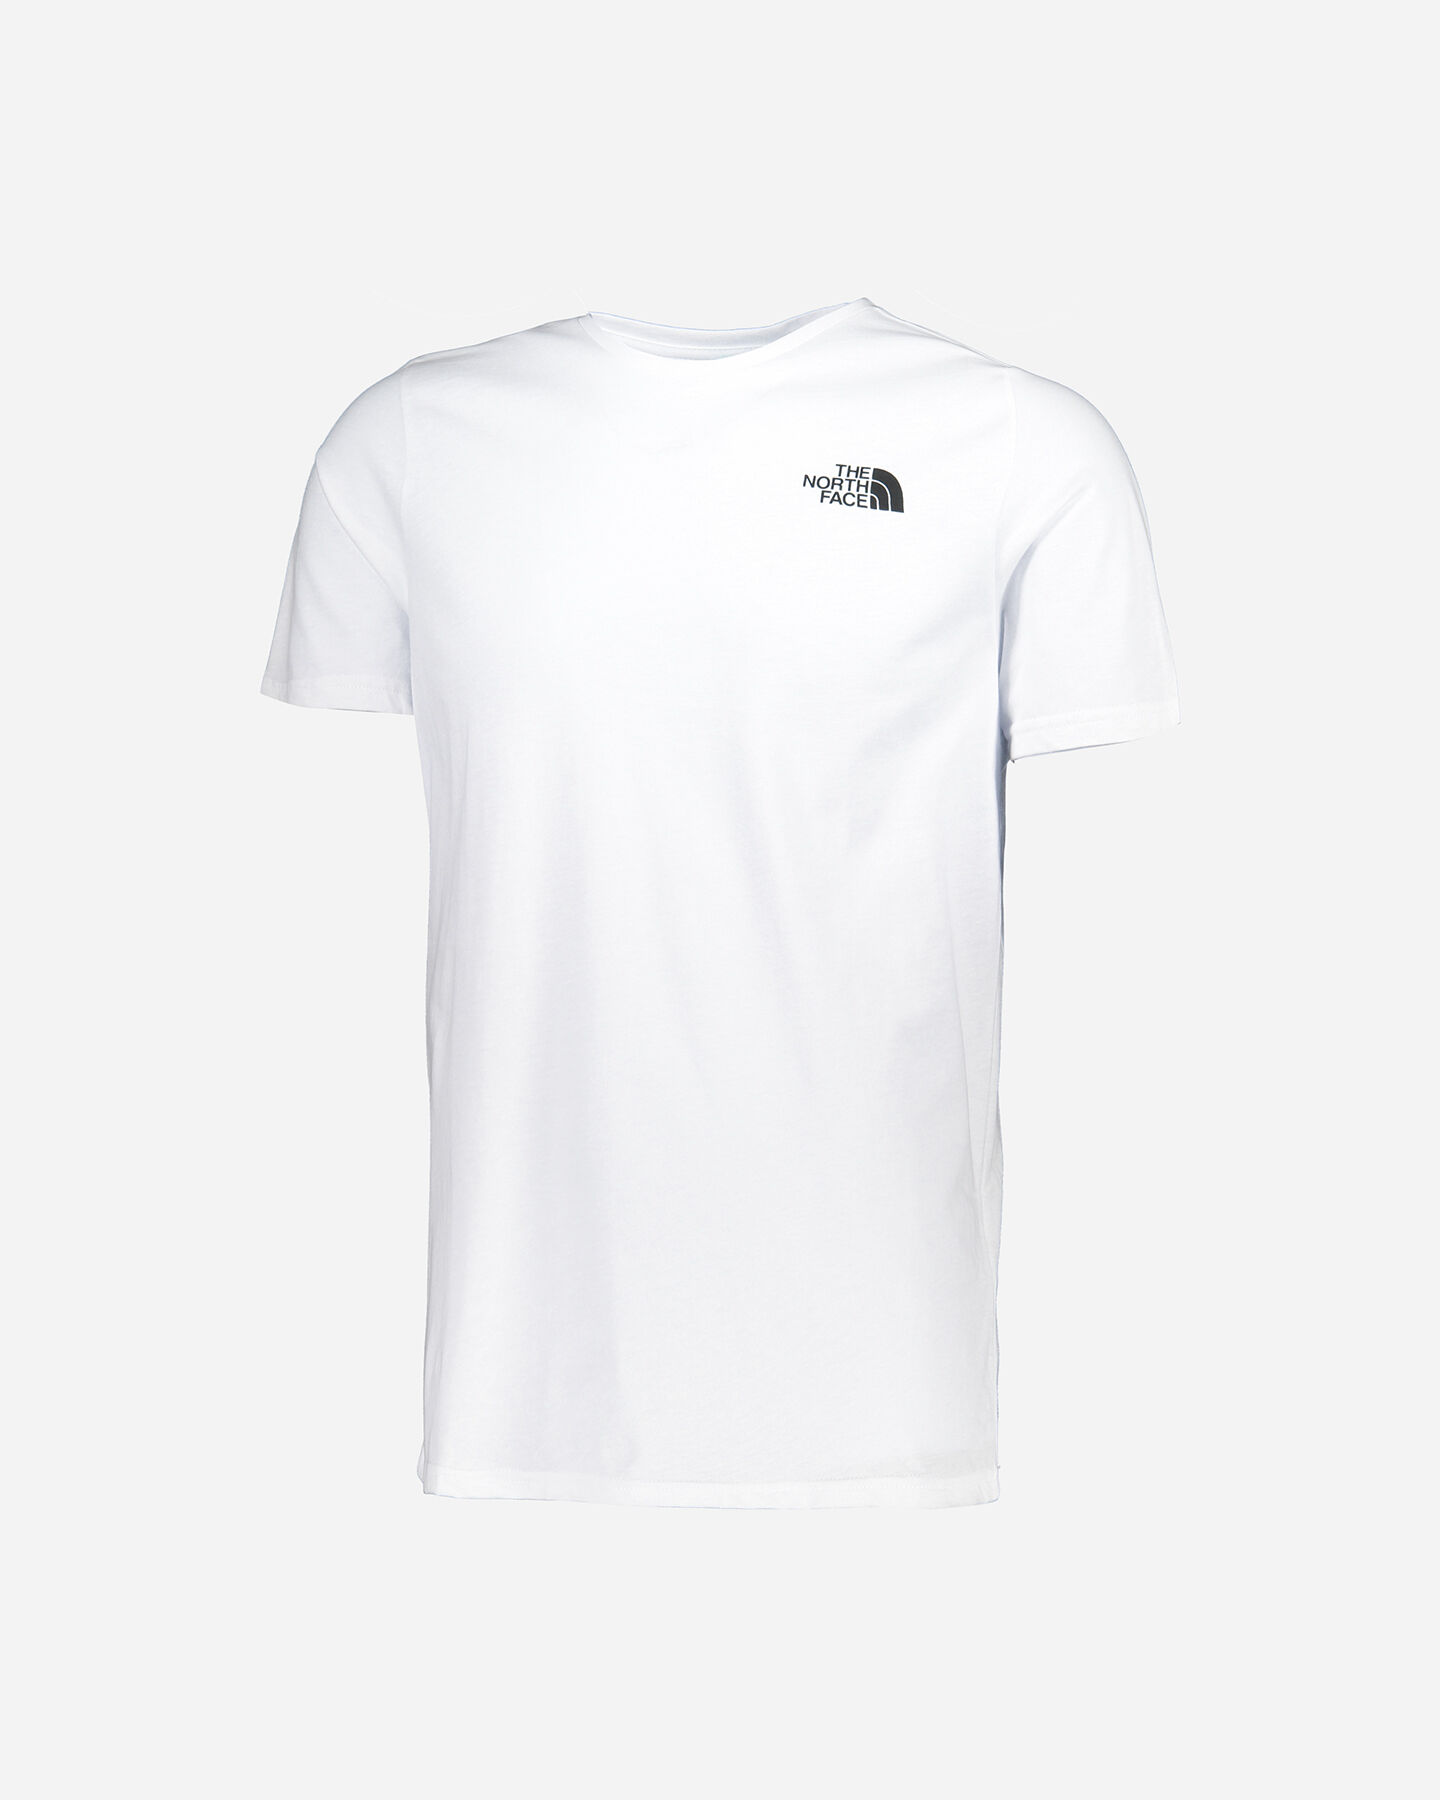  T-Shirt THE NORTH FACE BERARD M S5181620|FN4|S scatto 5